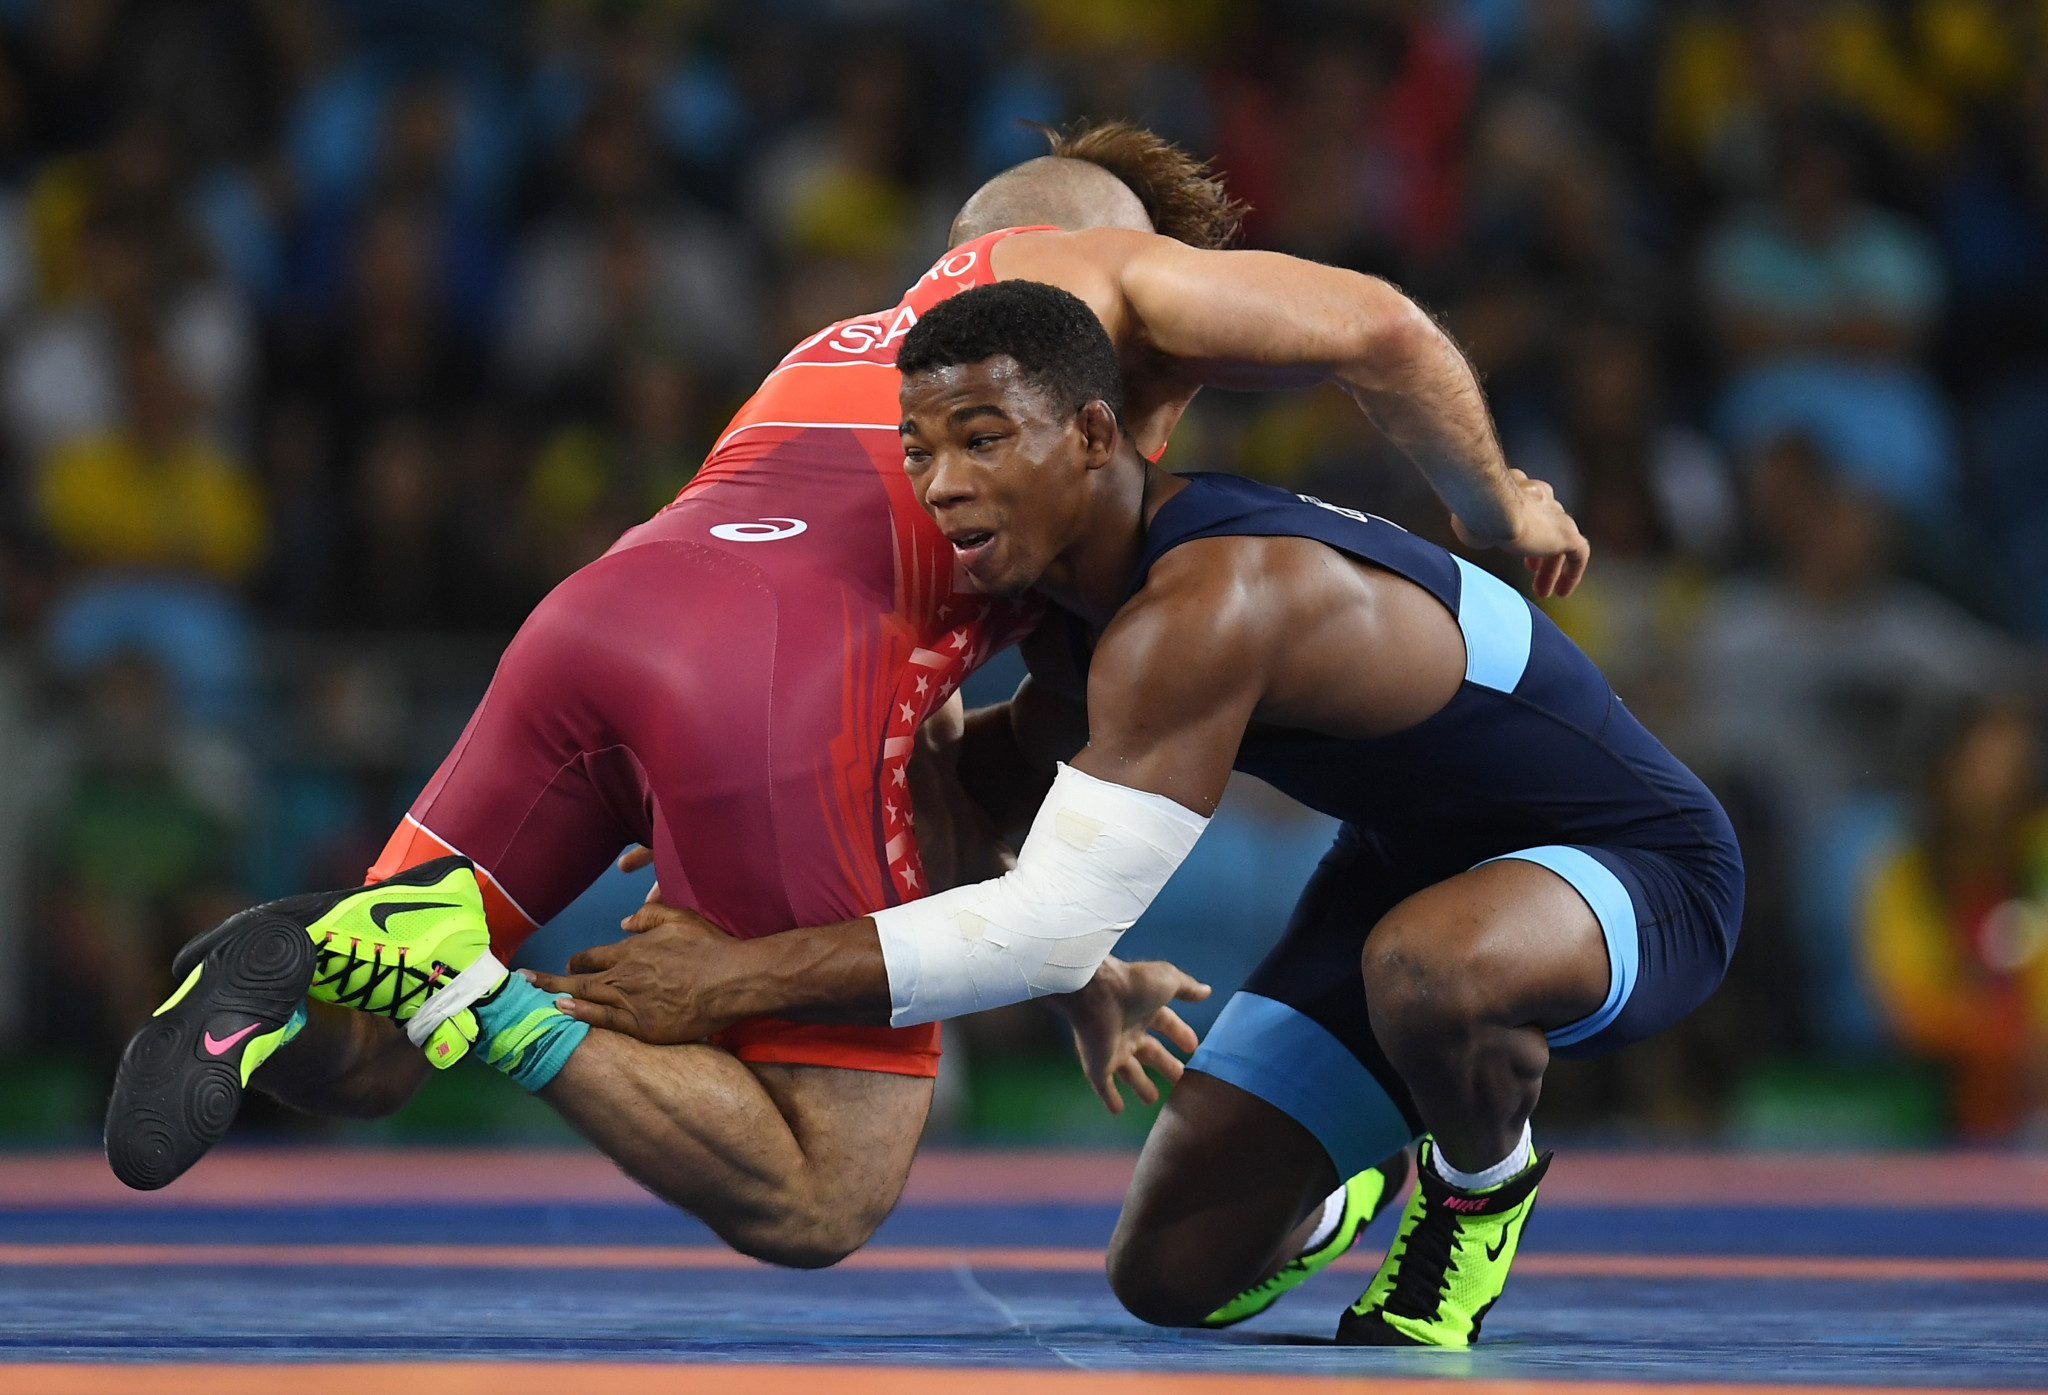 Frank Chamizo Marquez is aiming to secure a third straight European title in Poland ©Getty Images